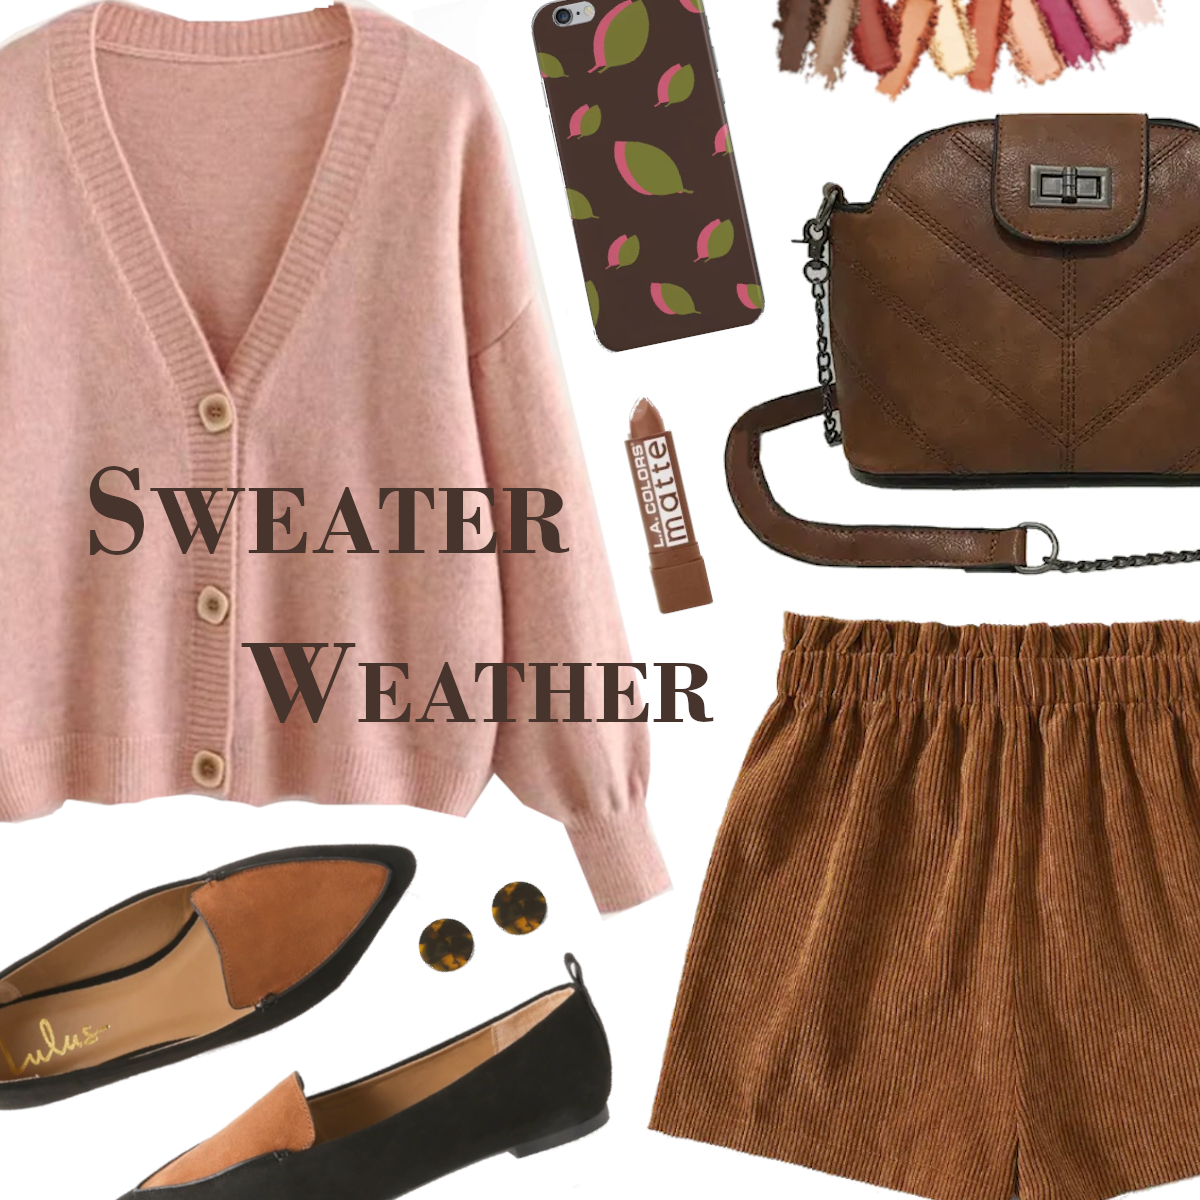 Pink cardigan corduroy shorts outfit